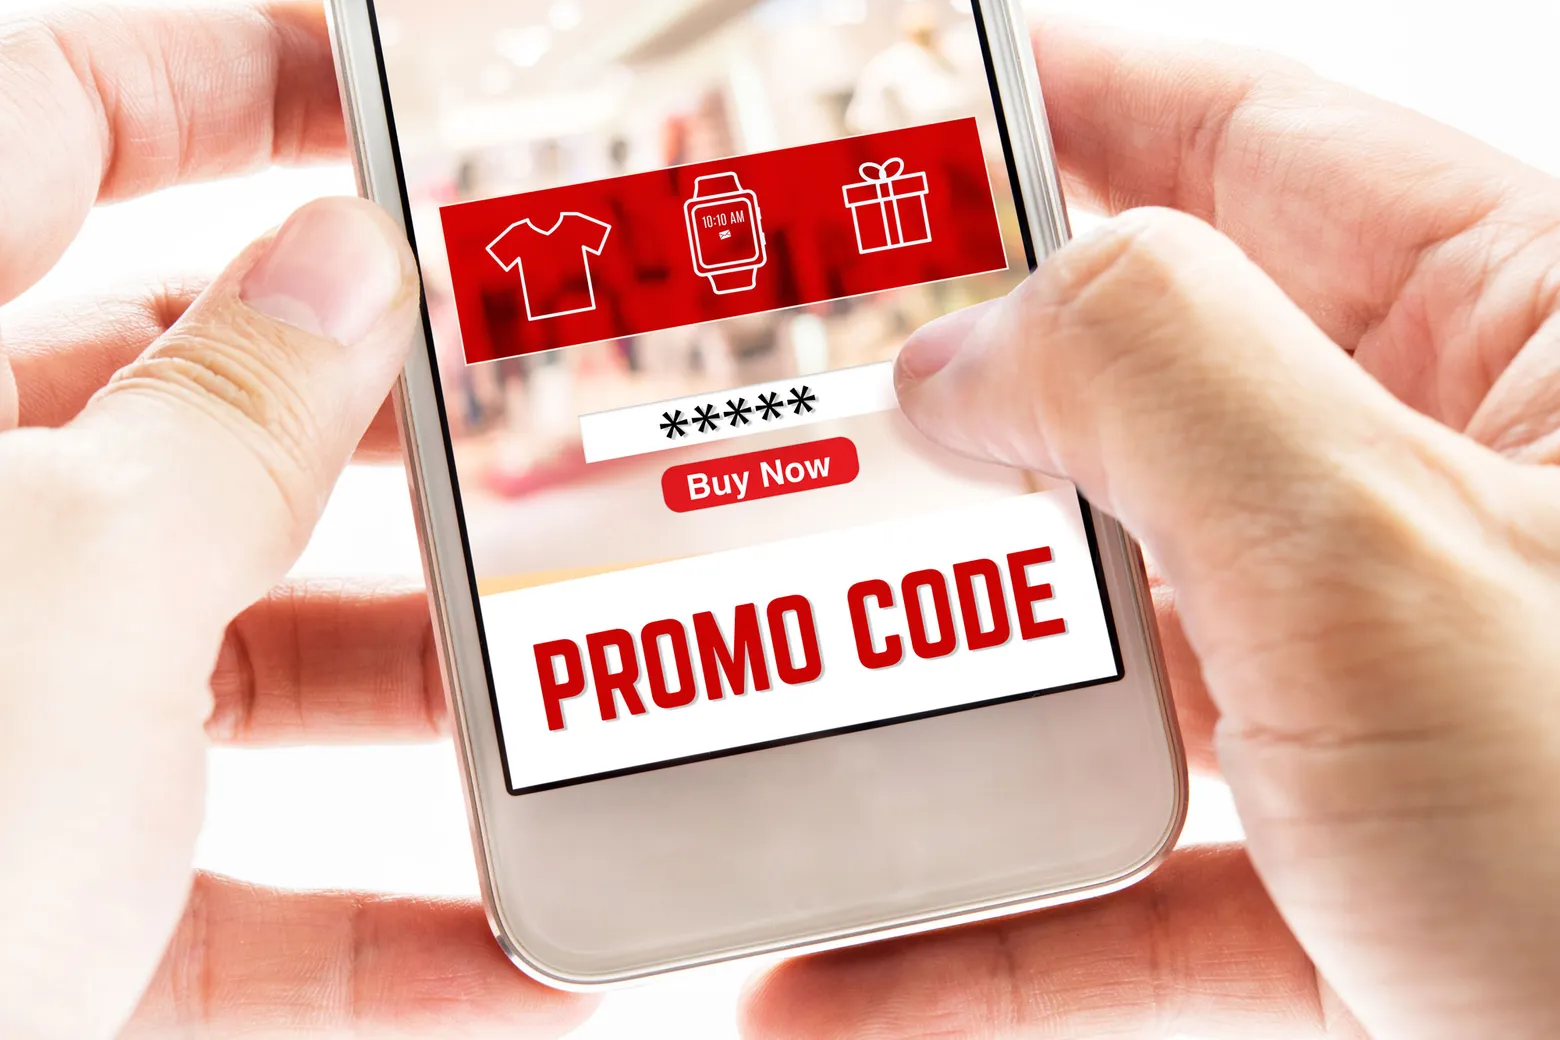 Aliexpress Promo Codes for All Users